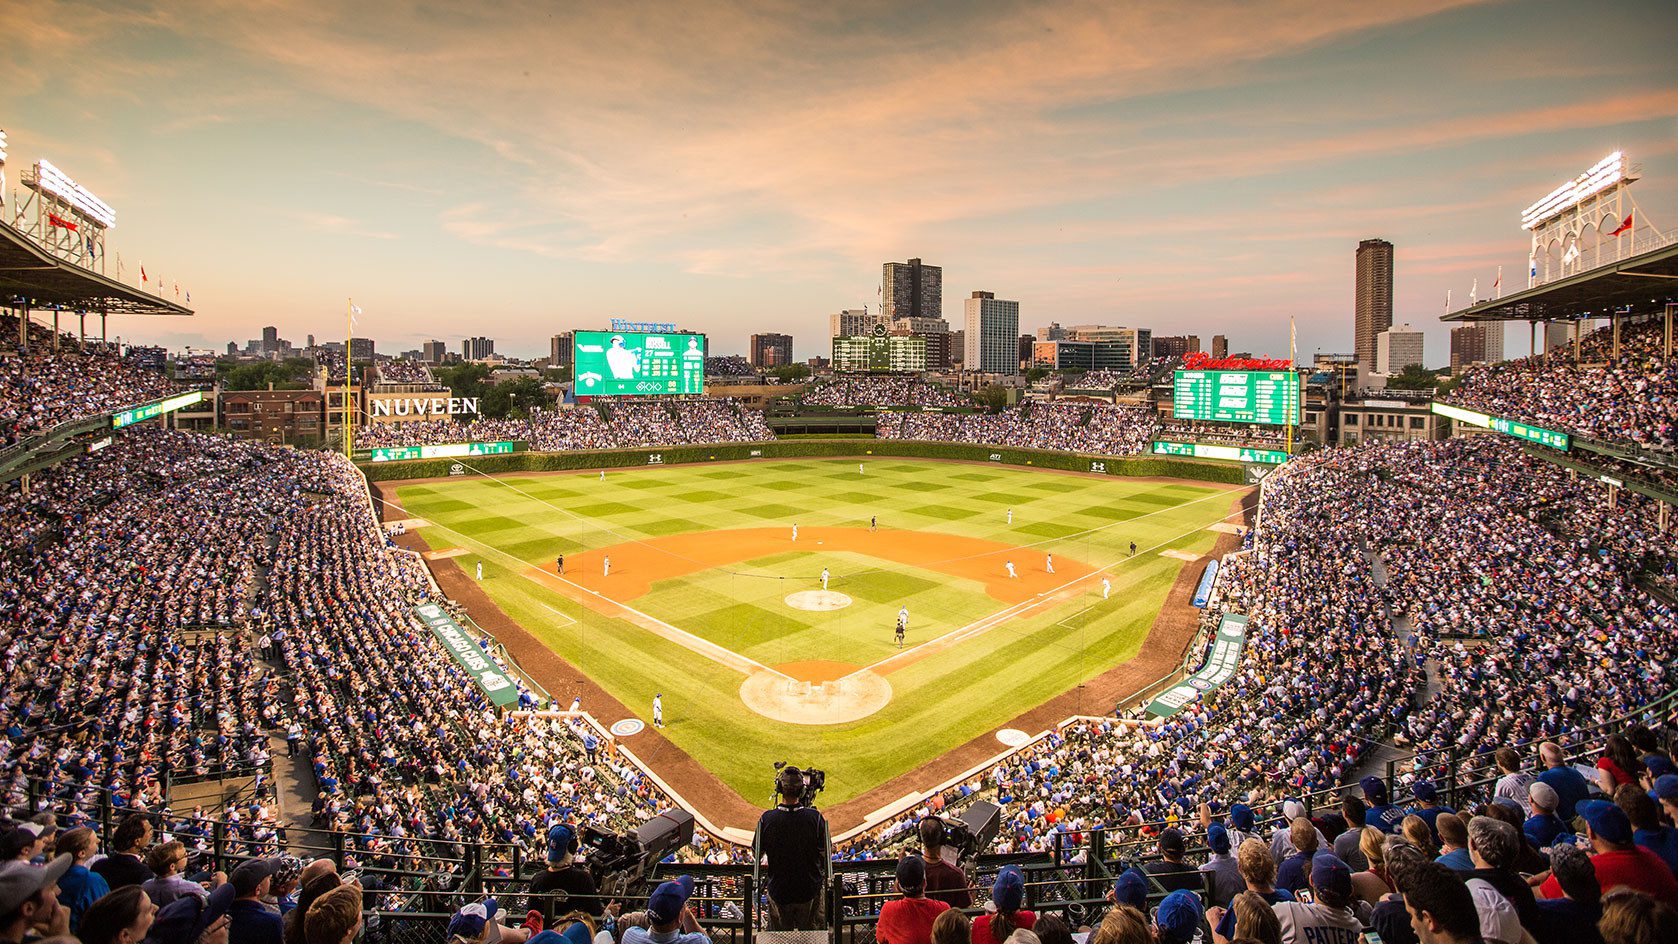 Free 'L' And Uber Rides After Cubs, Sox Games For Crosstown Classic -  Wrigleyville - Chicago - DNAinfo